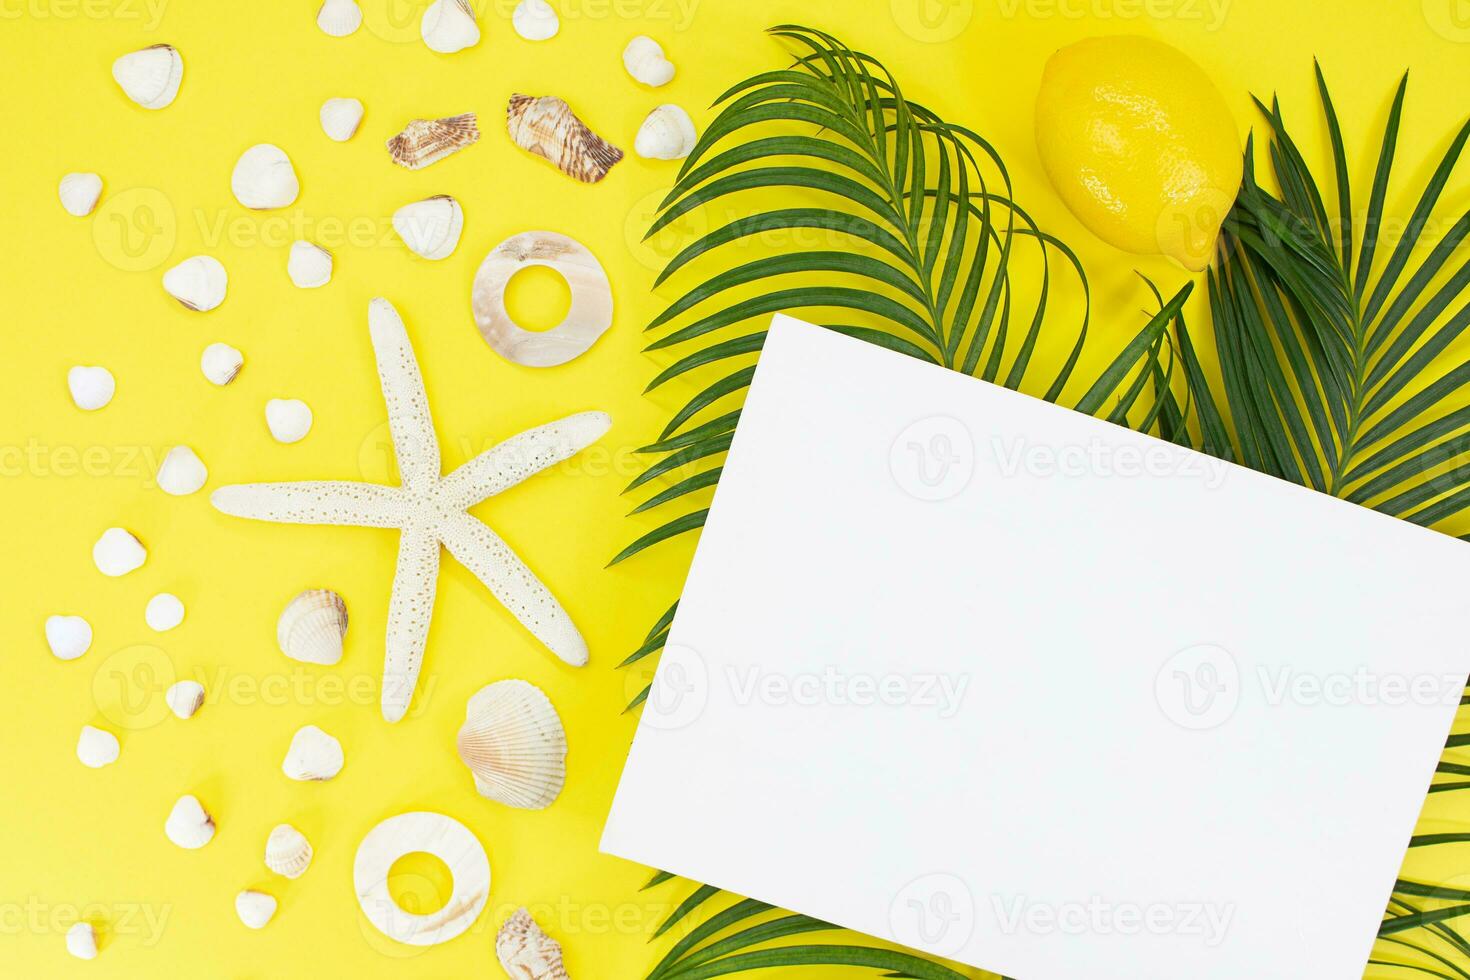 White starfish, shells with palm leaves and paper for text on side on yellow background. Flat lay. Travel, vacation, summer. Copy space photo